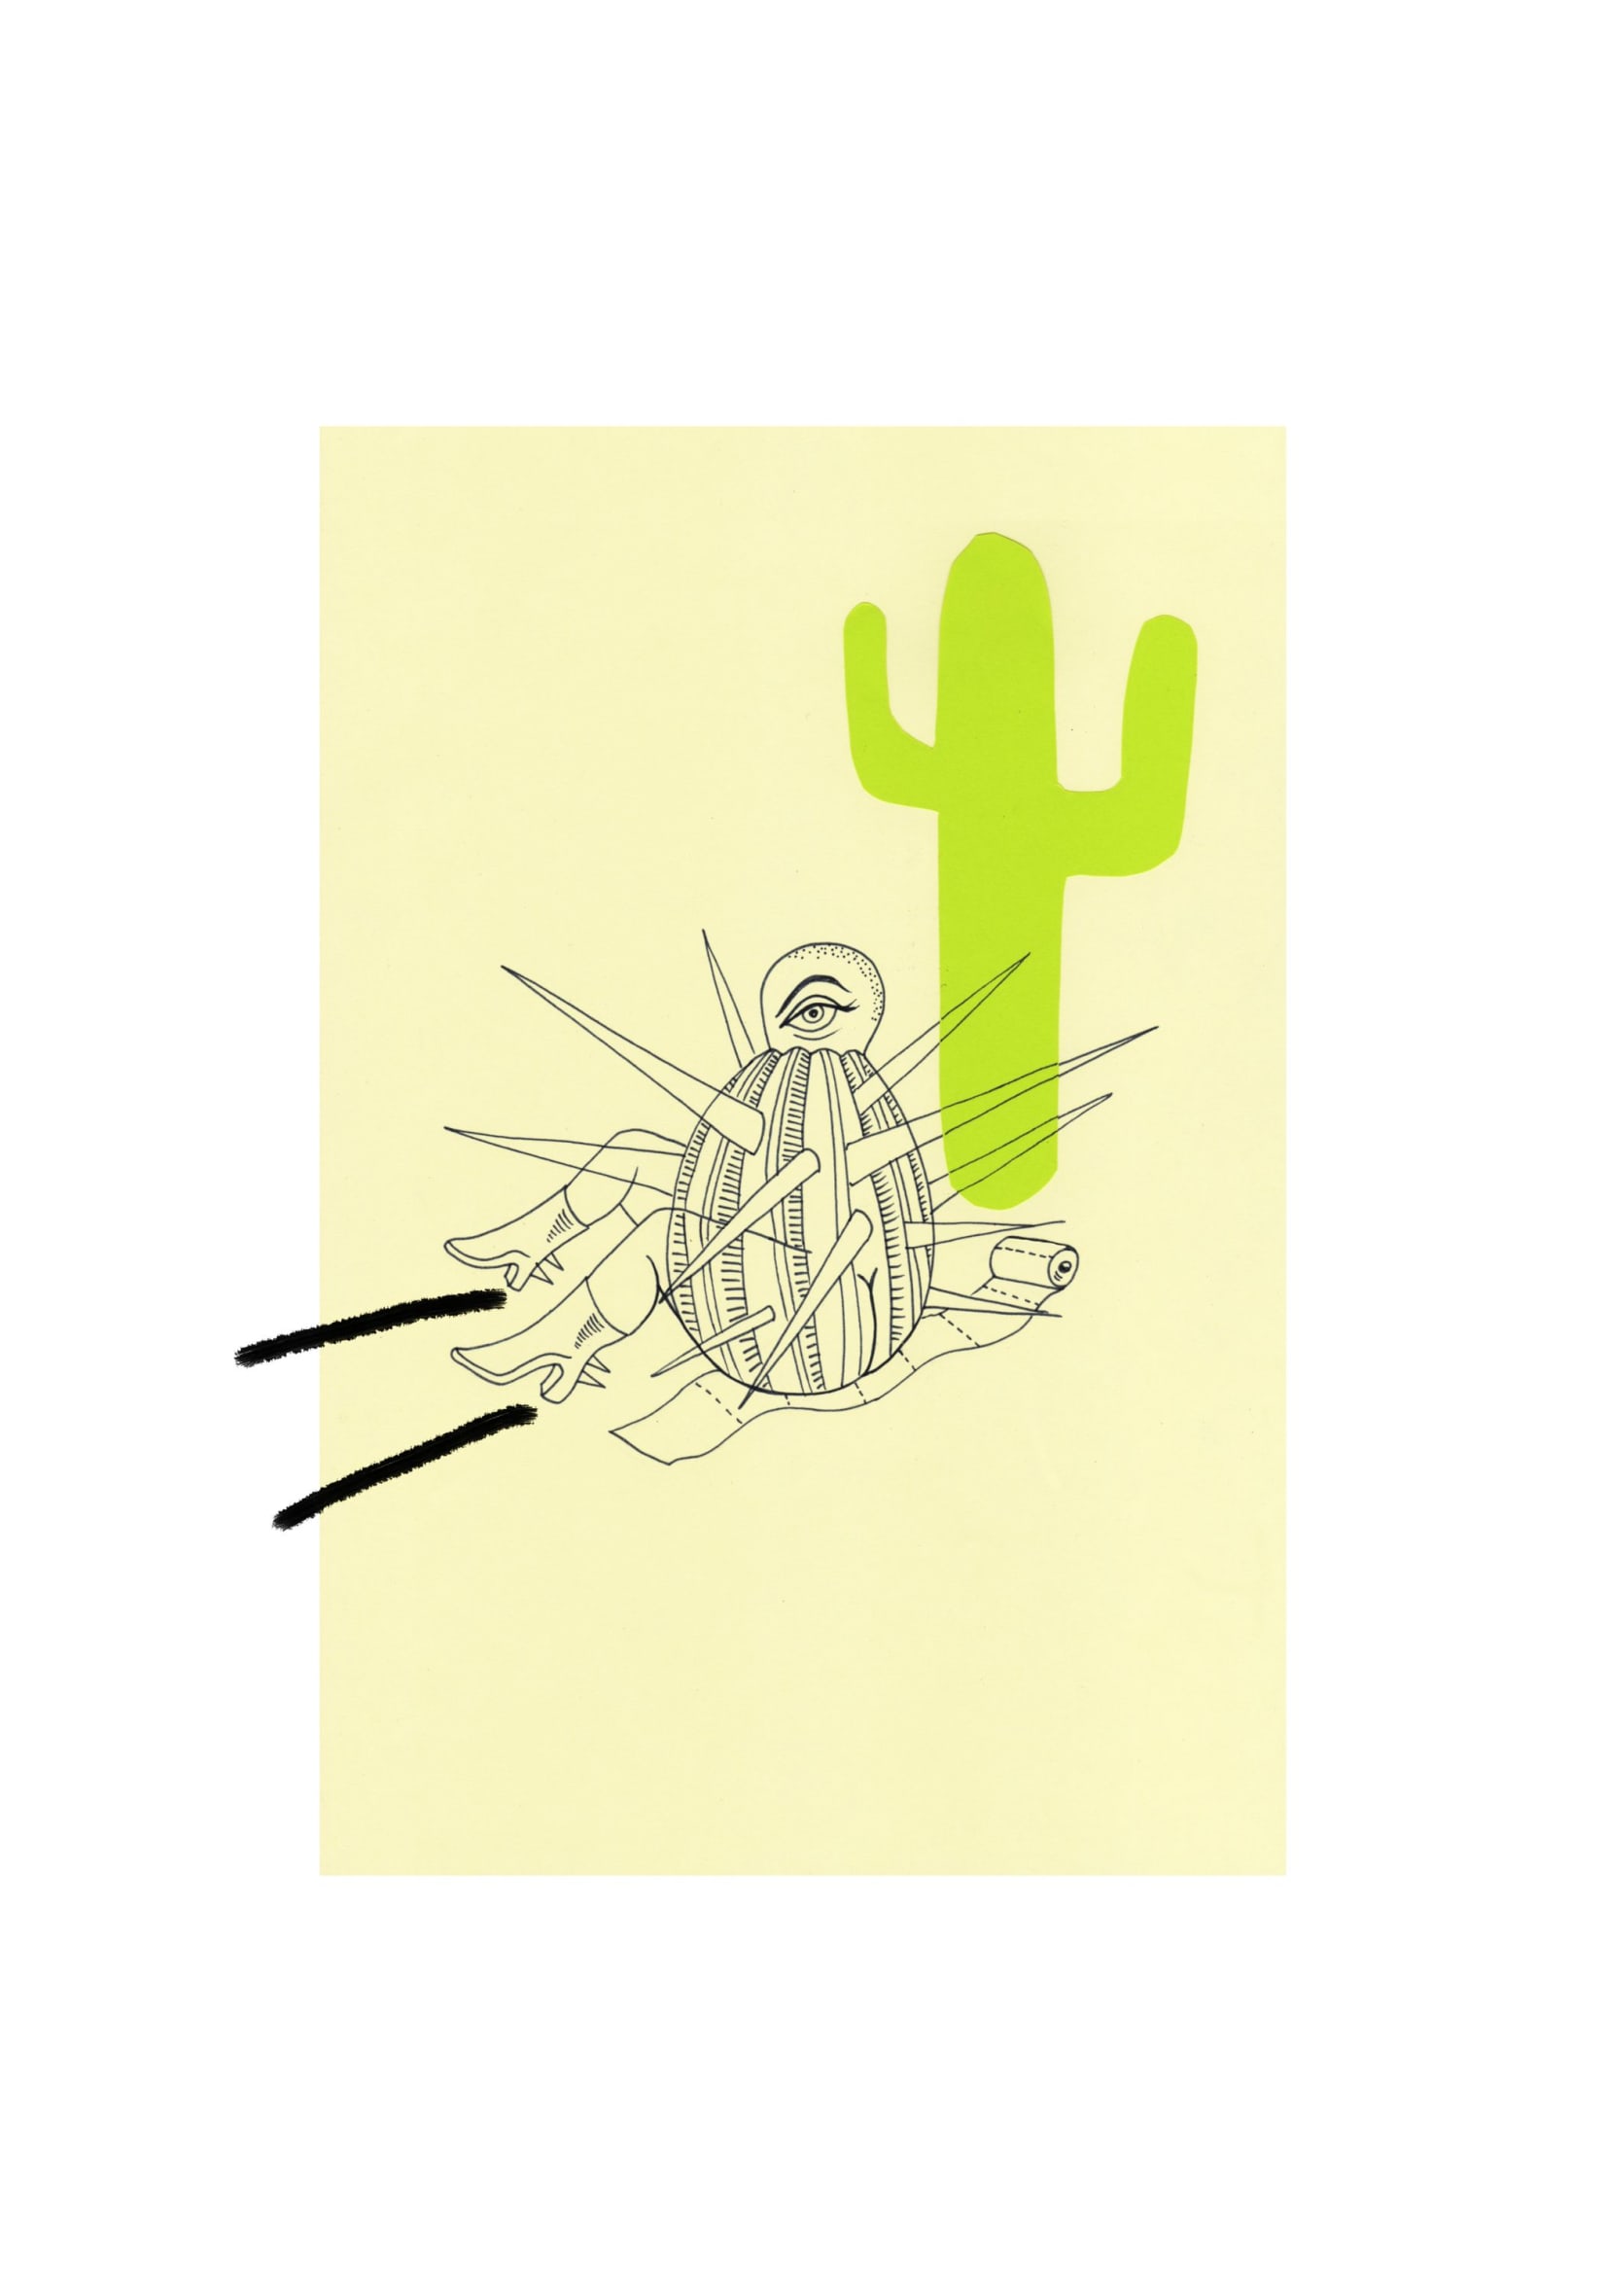 A portrait drawing in a yellow rectangle of a spiked round object with an eye and legs is sitting on an unravelled toilet roll next to a green cactus shape. Two black lines point away from the legs. A white background frames the drawing.